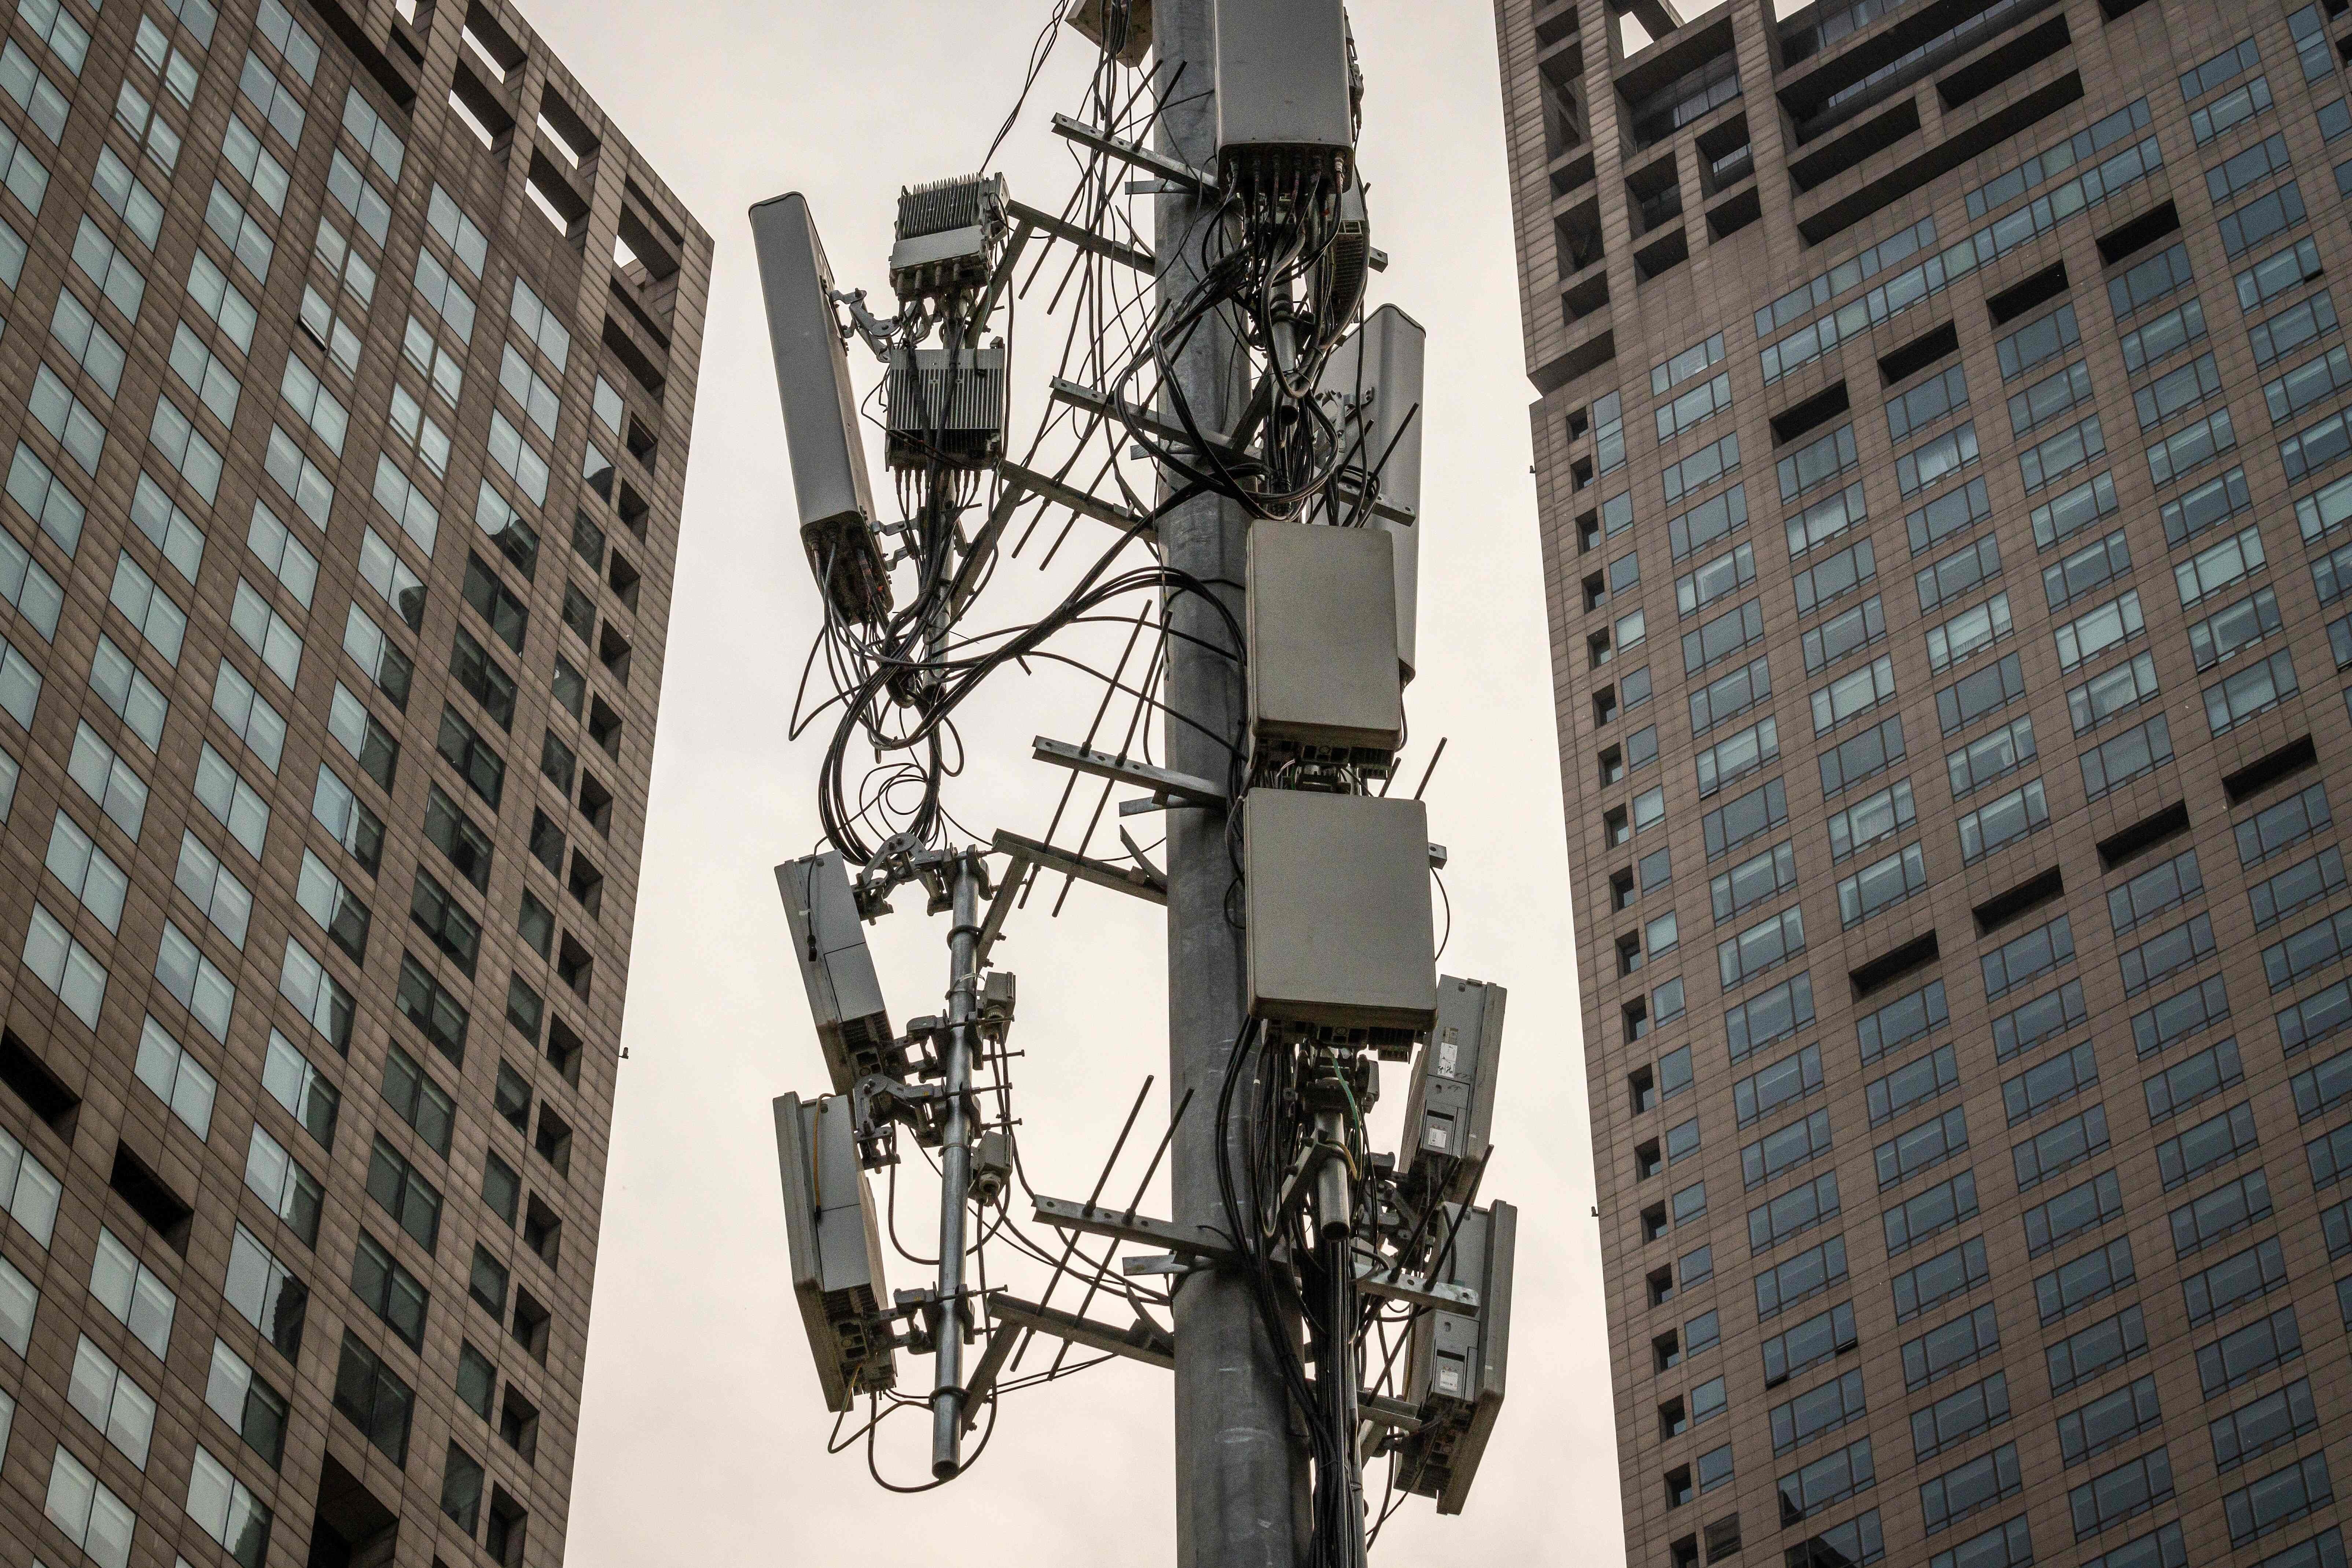 A 5G network cellphone tower in Beijing on April 7, 2020. The bulk of 5G hardware contracts continue to go to Shenzhen-based giants Huawei and ZTE as international tensions hurt their prospects overseas. Photo: AFP